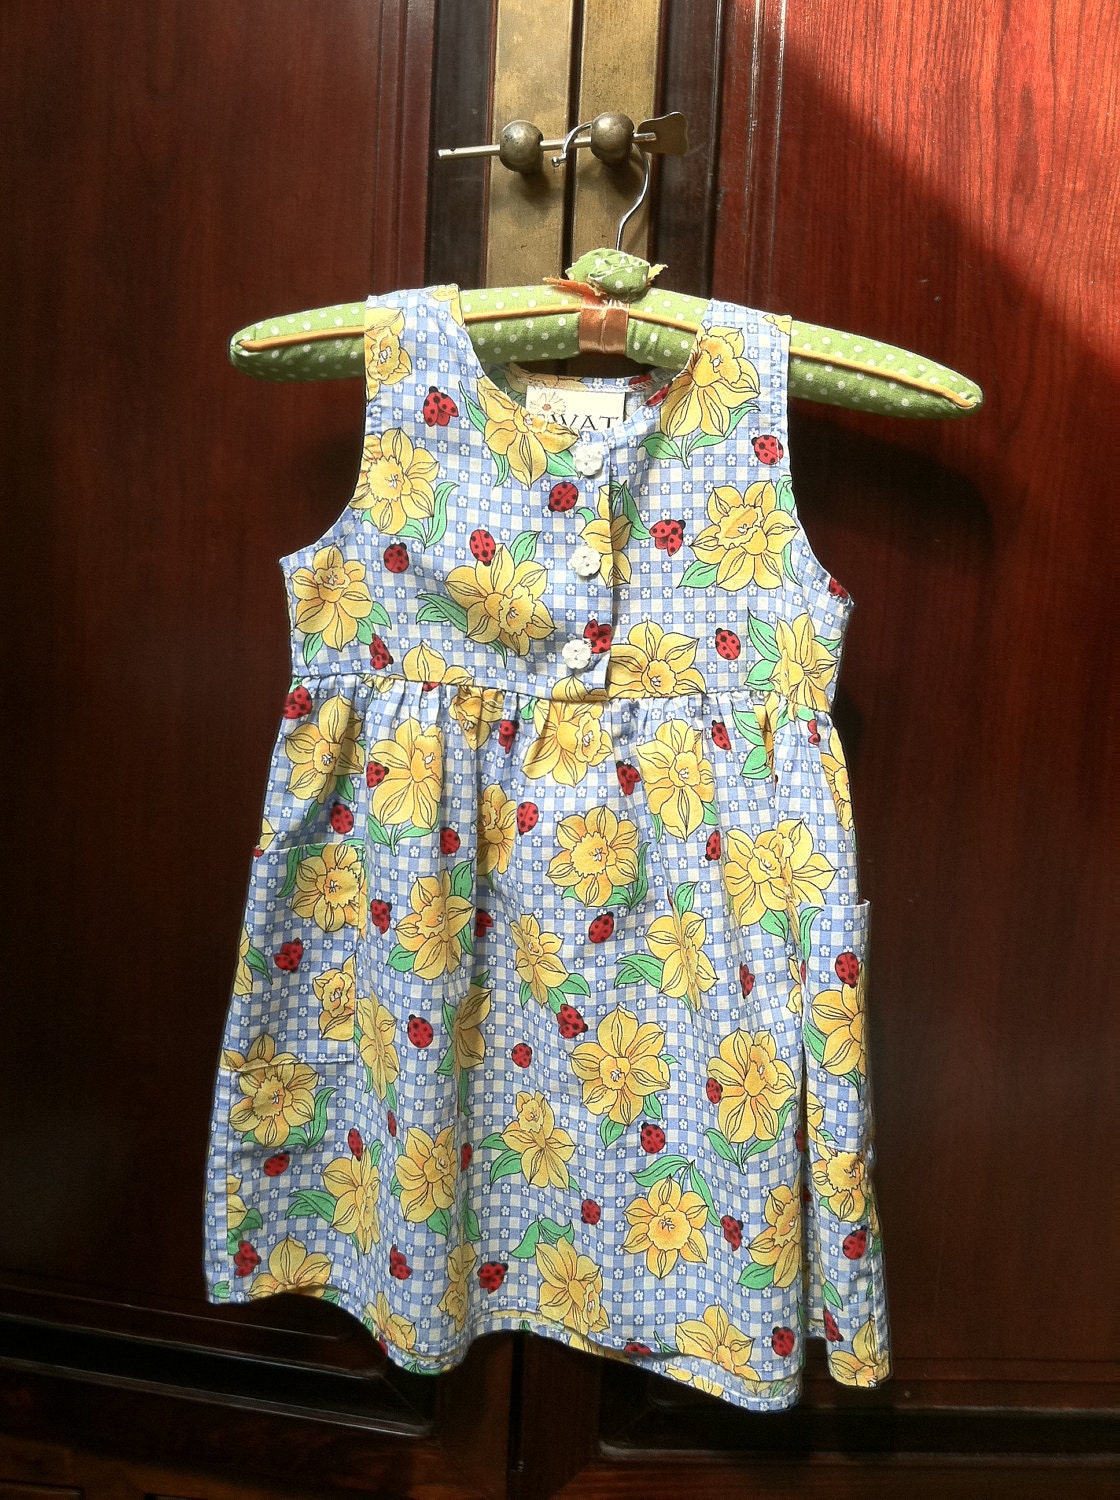 Vintage Empire Waist Girl's Summer Dress Cotton Ladybugs Yellow Flowers Blue and White Checkered